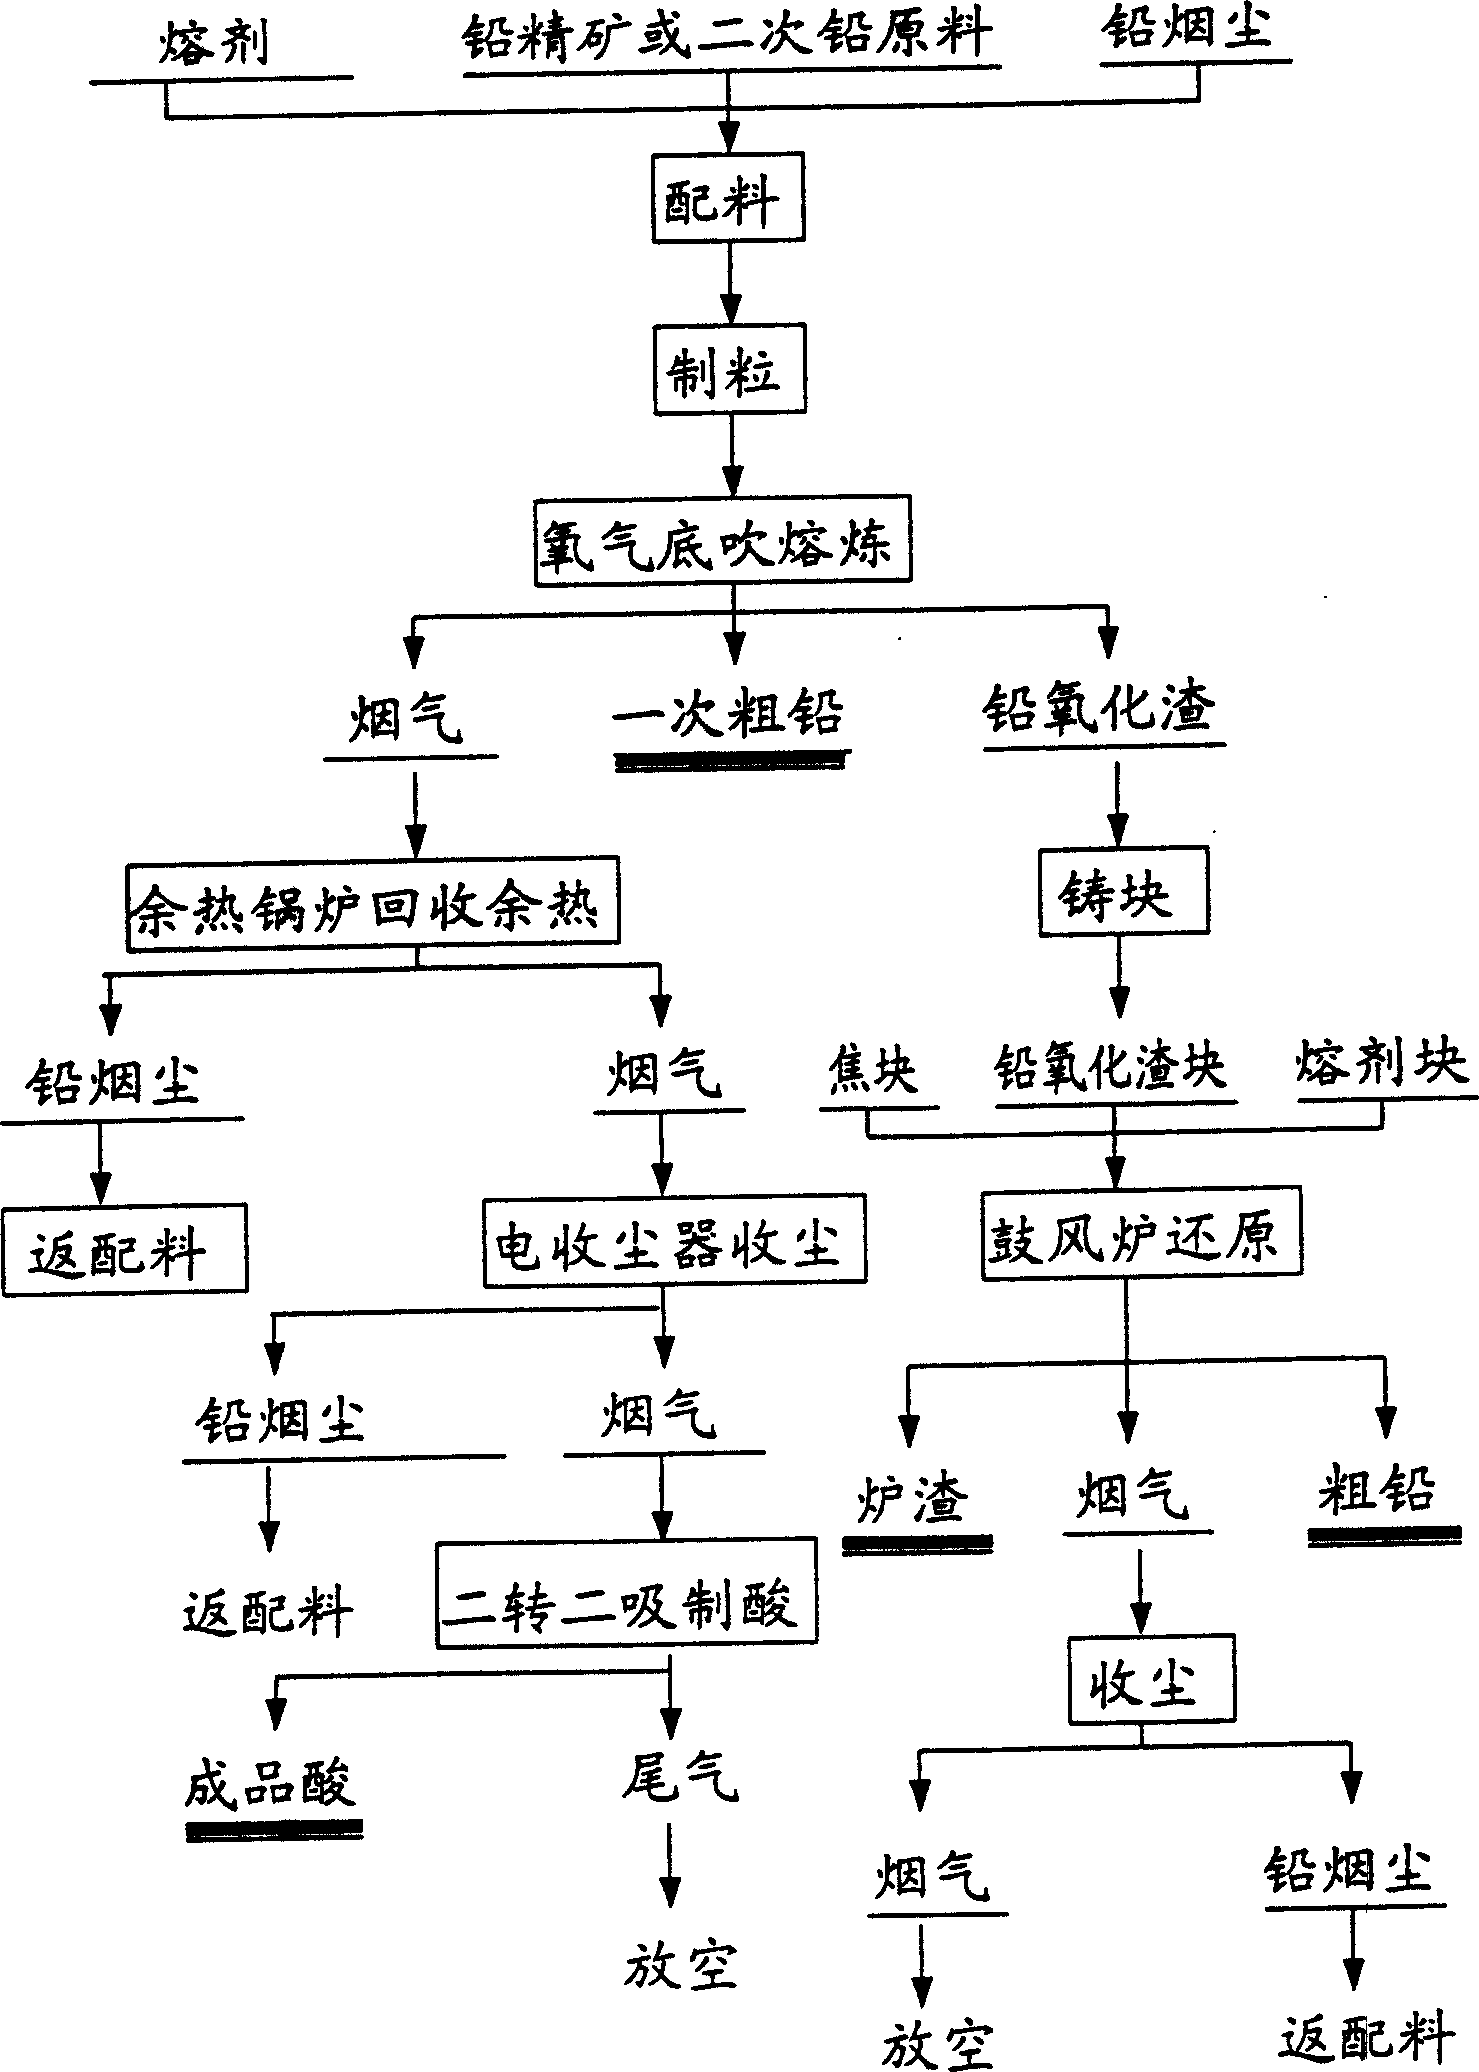 Oxygen bottom-blowing-blast furnace reduction process for lead smelting and apparatus therefor